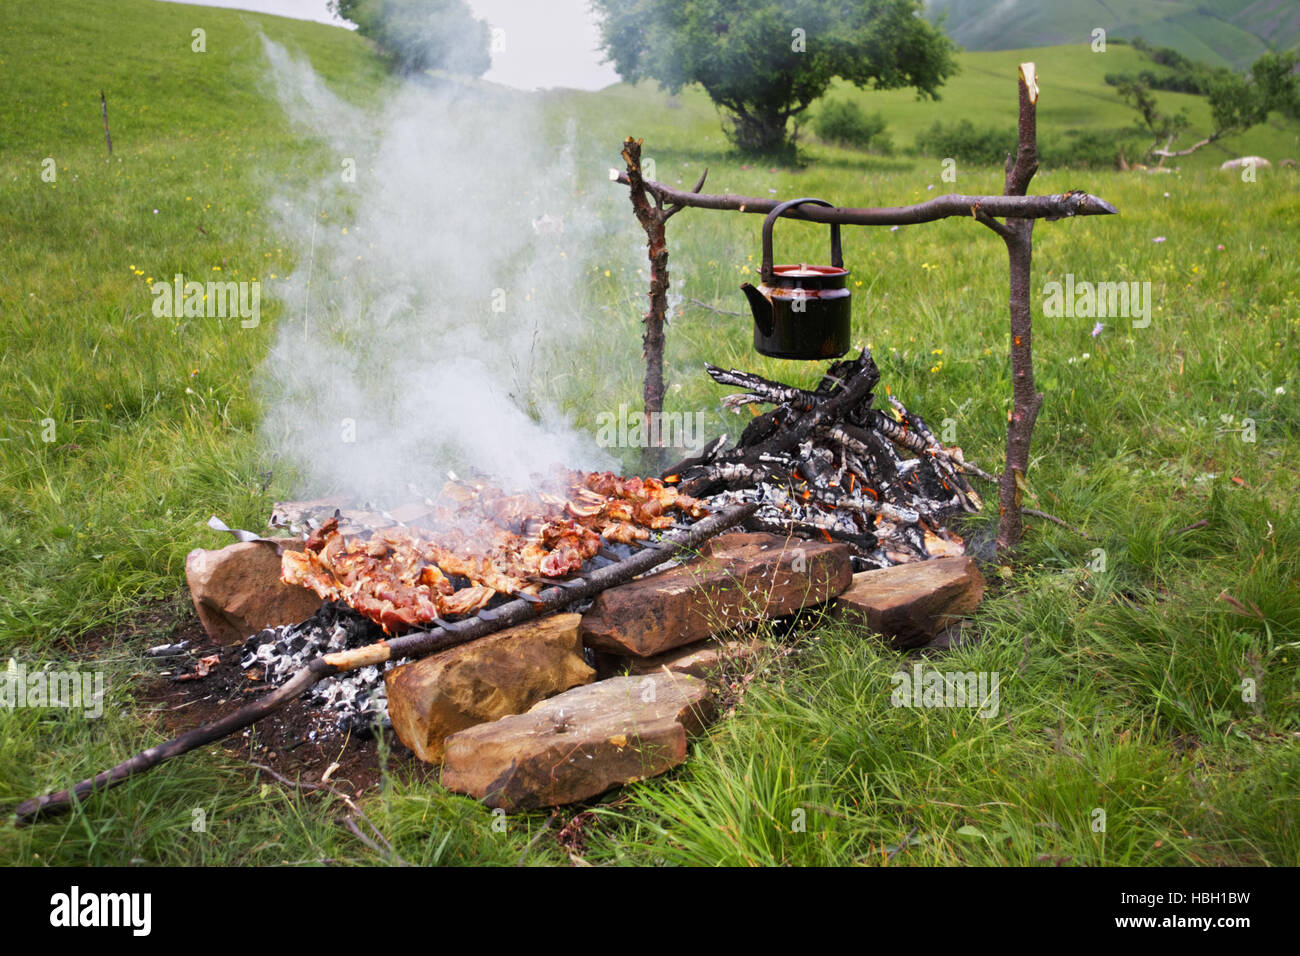 Meat grilled on charcoal Stock Photo